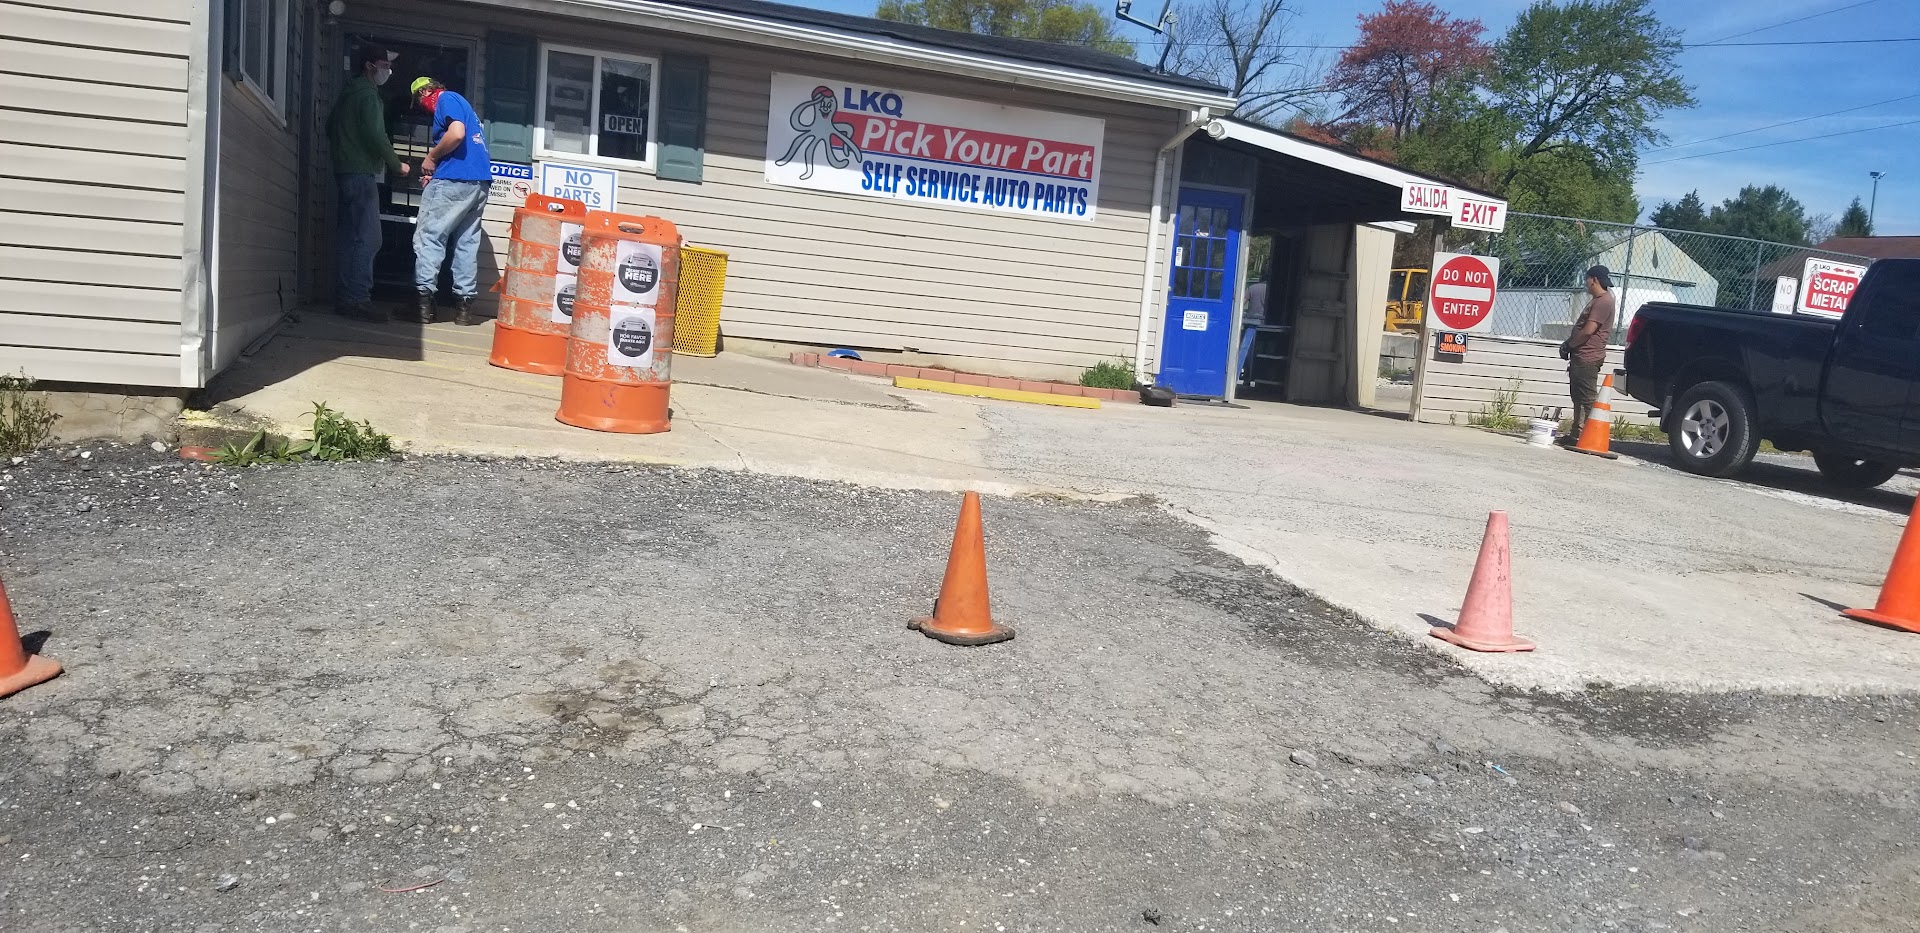 Used auto parts store In Mt Airy MD 